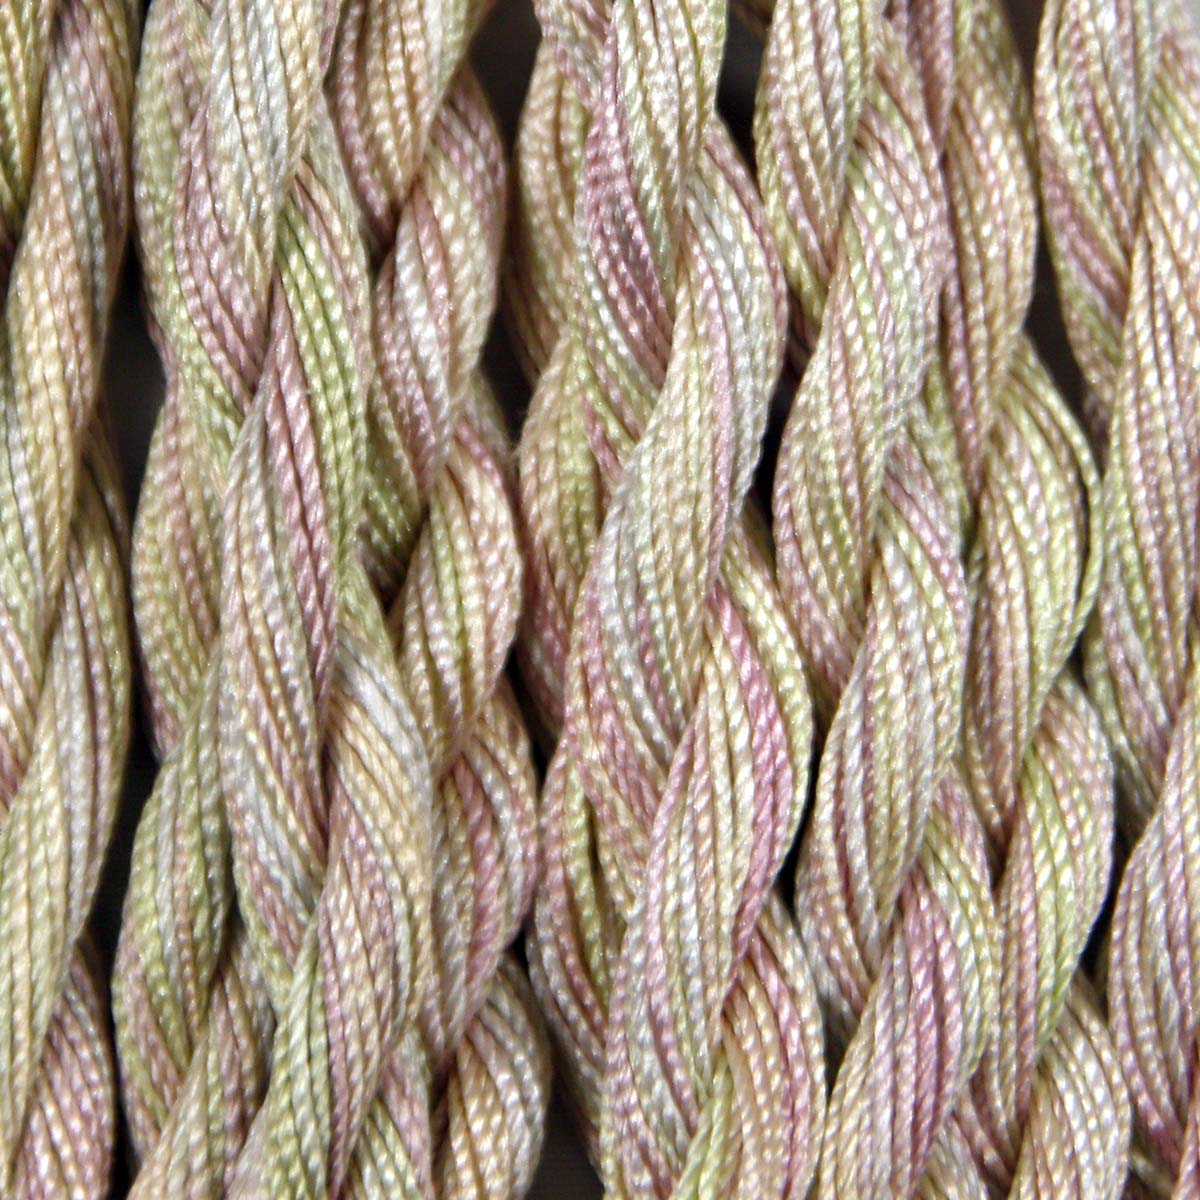 www.colourstreams.com.au Colour Streams Hand Dyed Silk Threads Silken Strands Ophir Exotic Lights Aurora Slow Stitch Embroidery Textile Arts Fibre DL  44 Faded Rose Yellows Pinks Greens